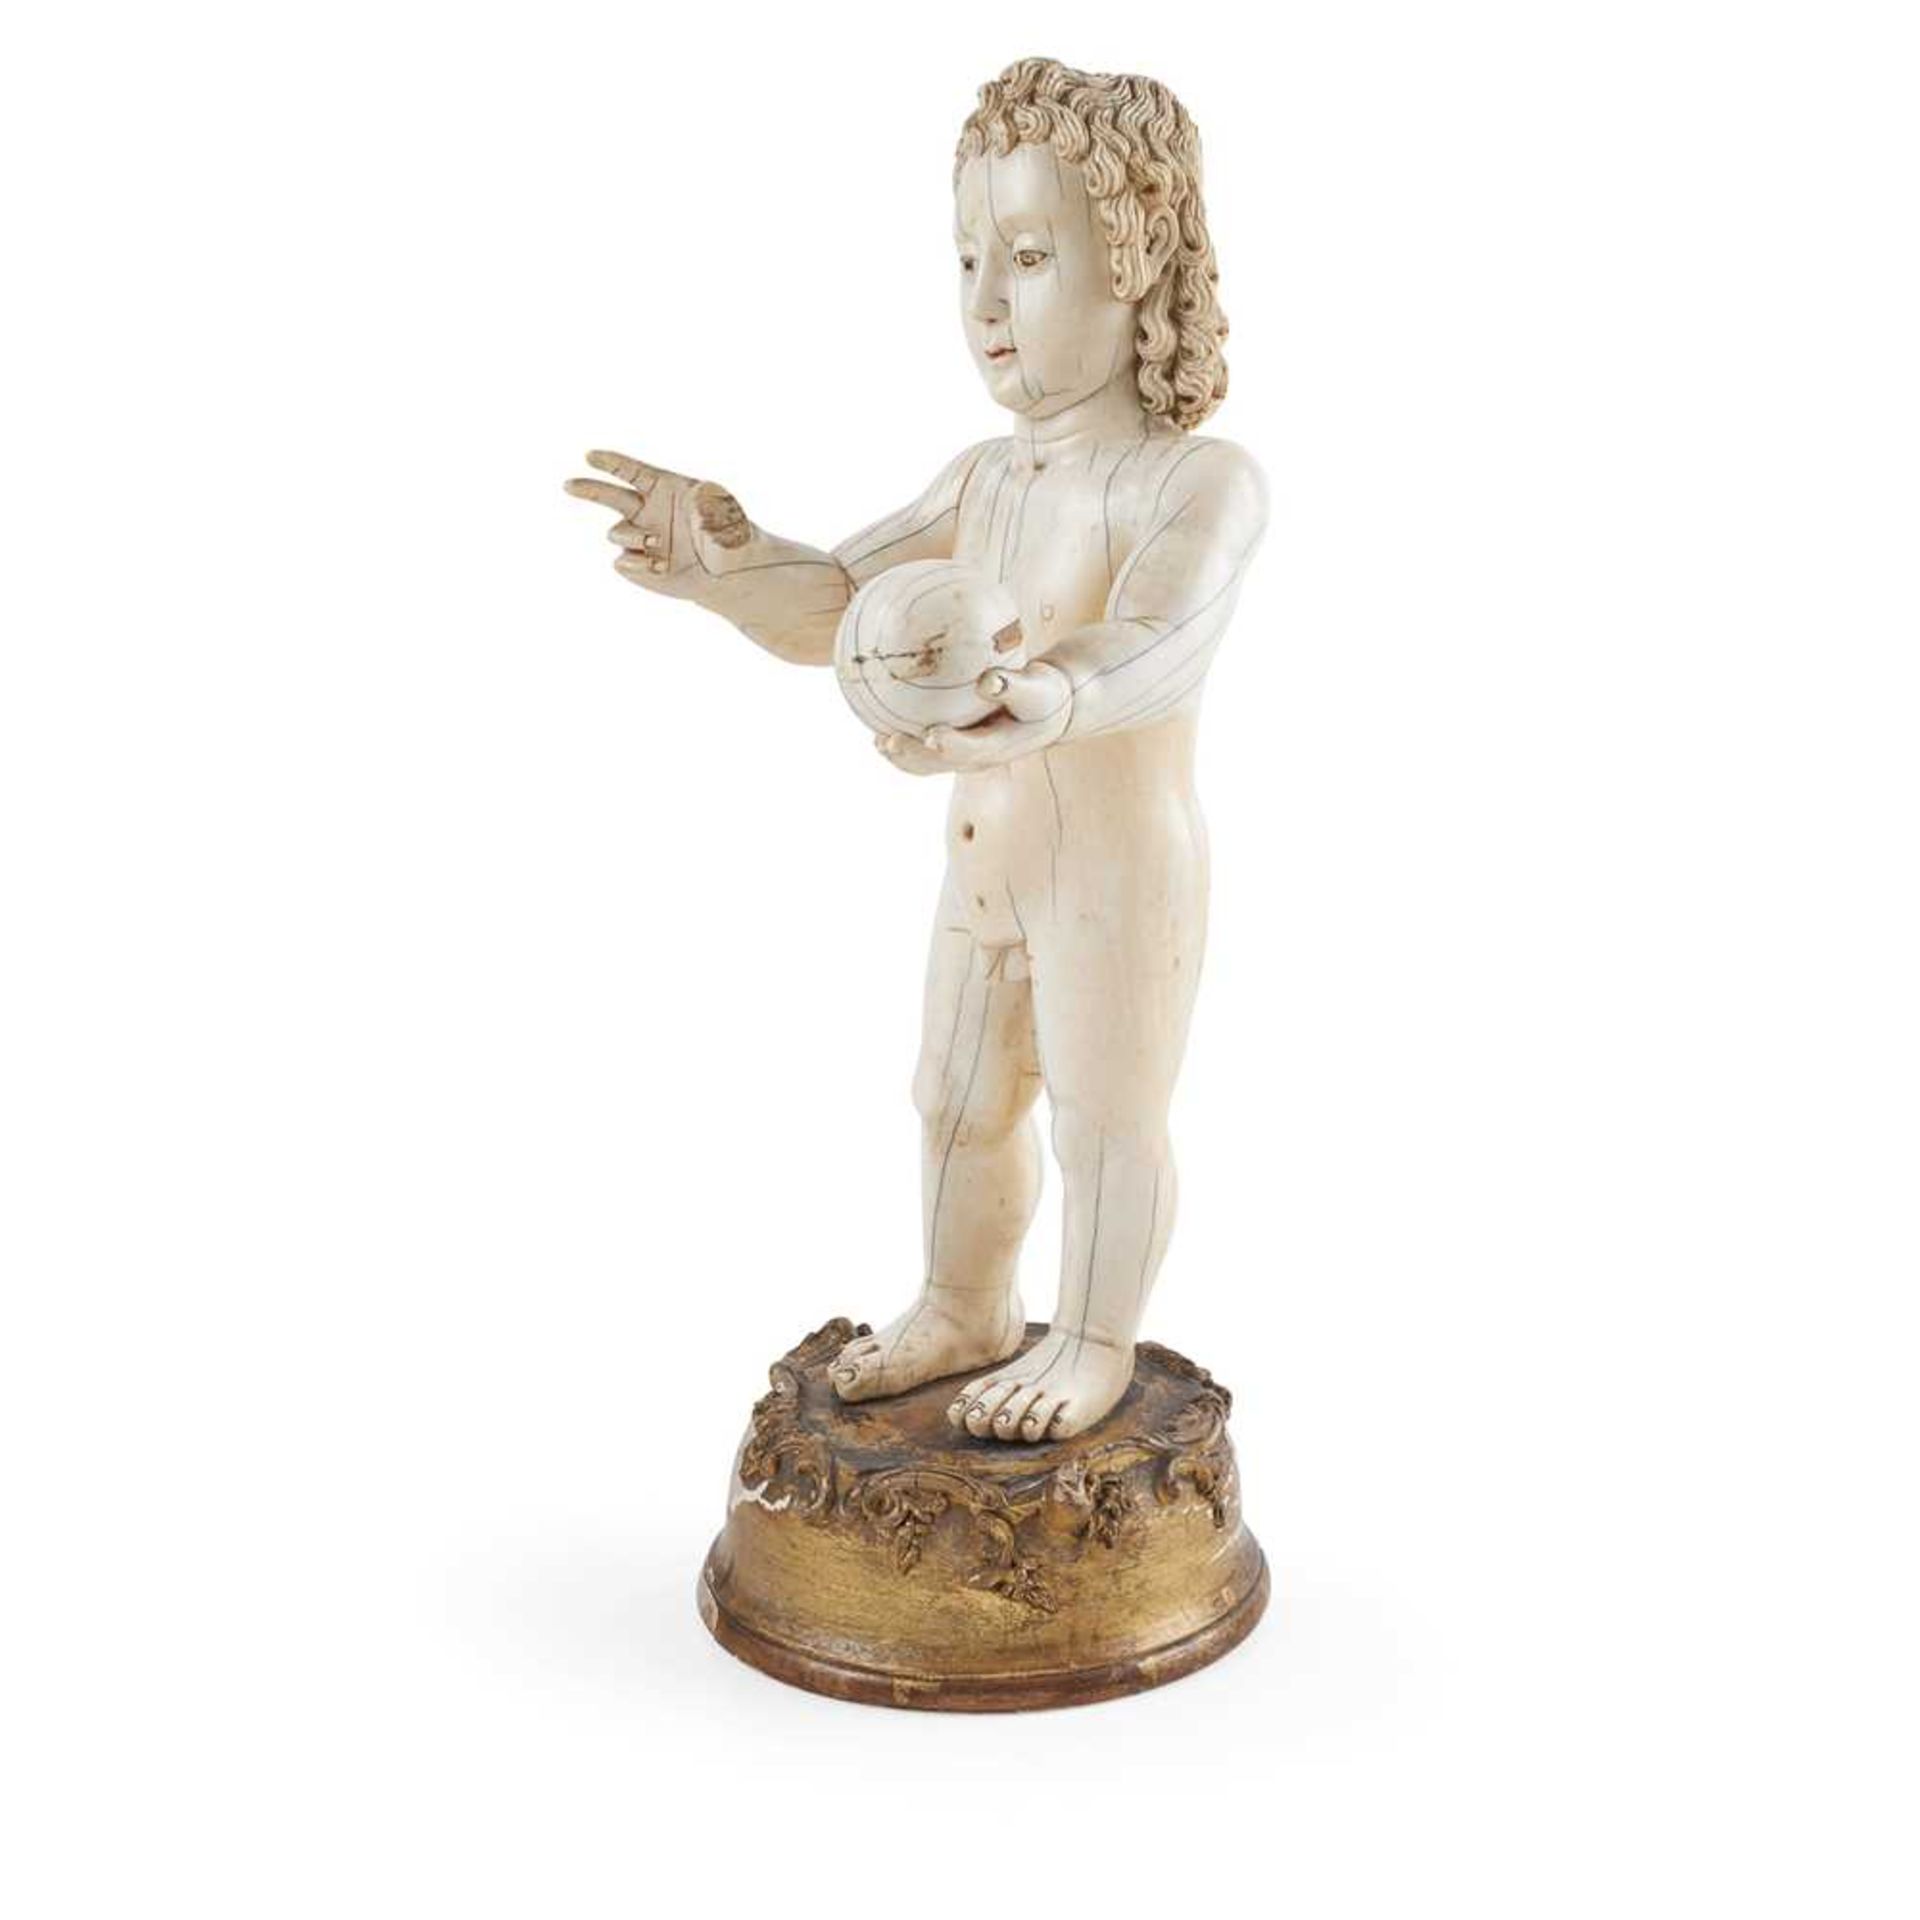 LARGE INDO-PORTUGUESE CARVED IVORY FIGURE OF THE INFANT CHRIST AS SALVATOR MUNDI, THE SAVIOUR OF THE - Image 2 of 7